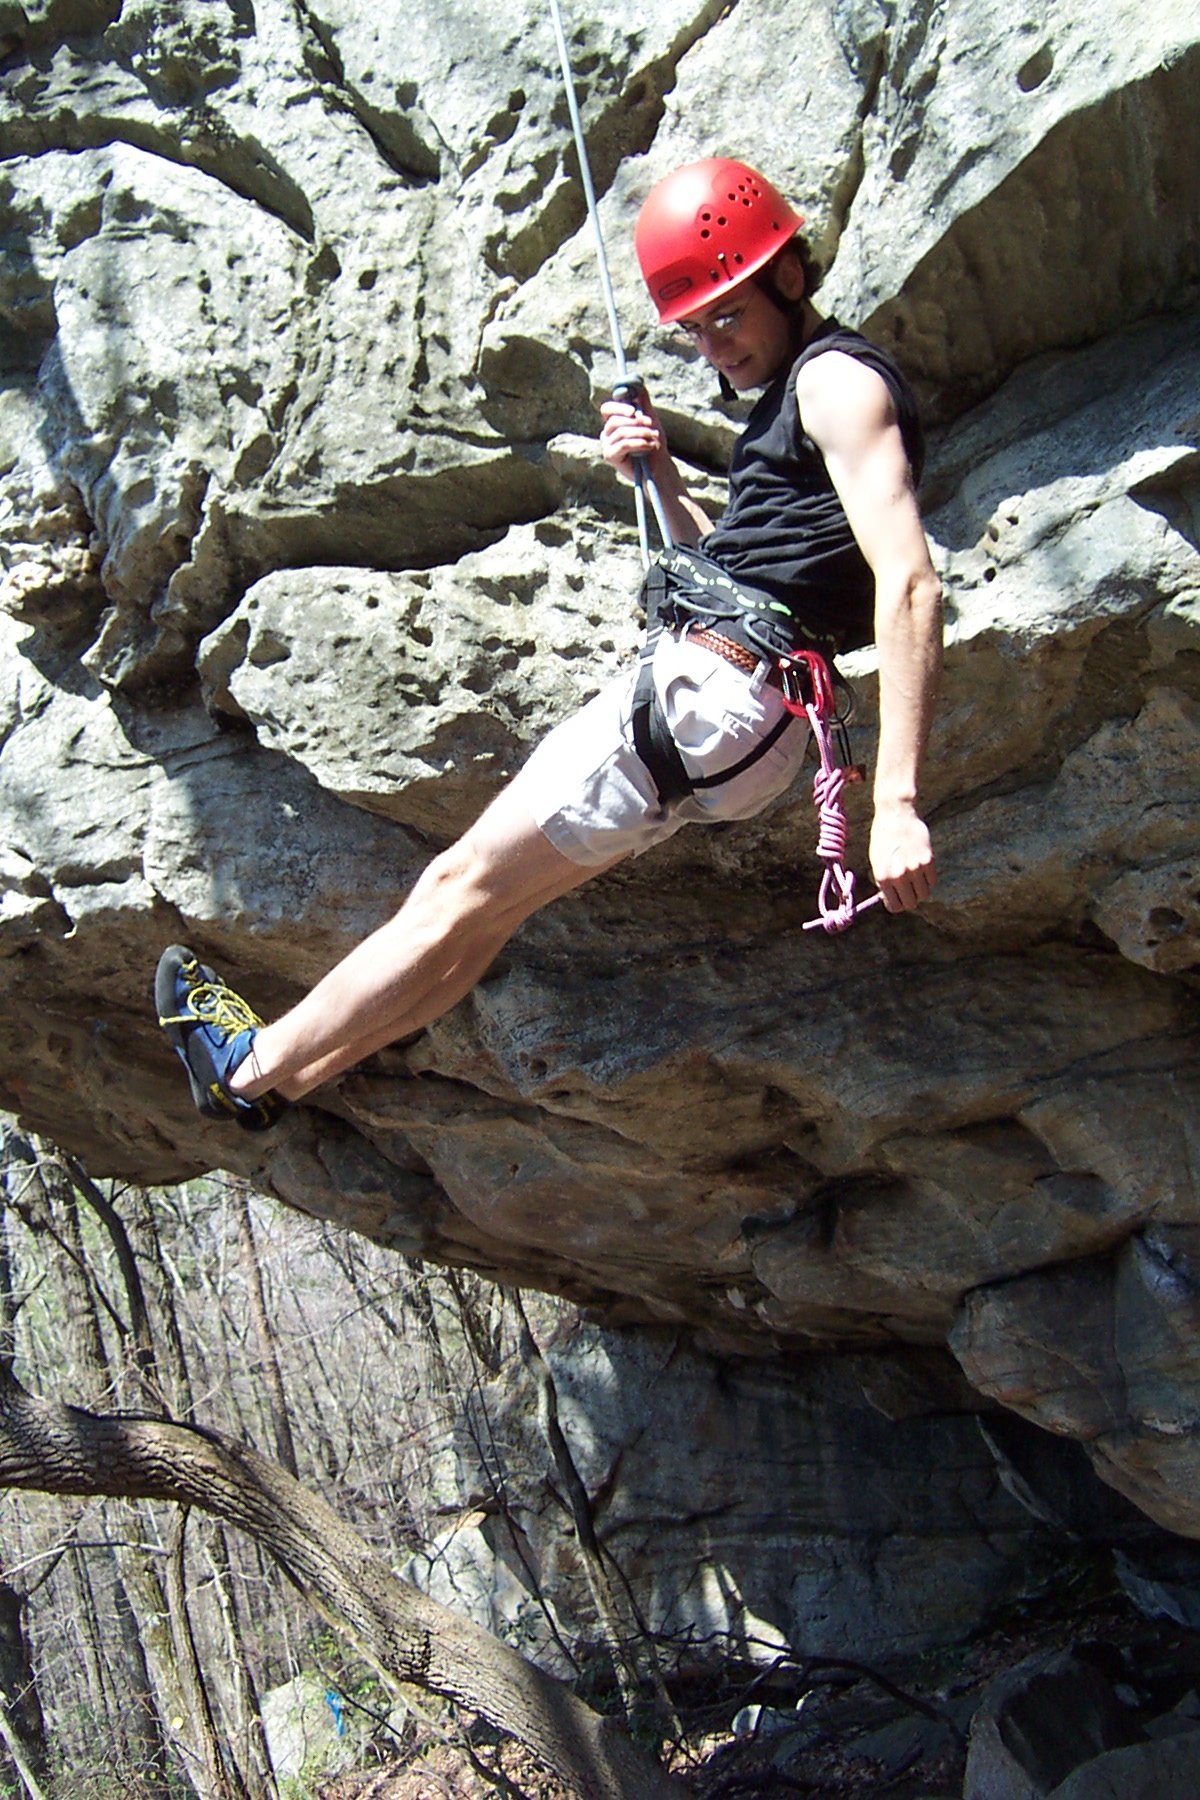 a man wearing a red helmet and safety gear climbing up a rock face